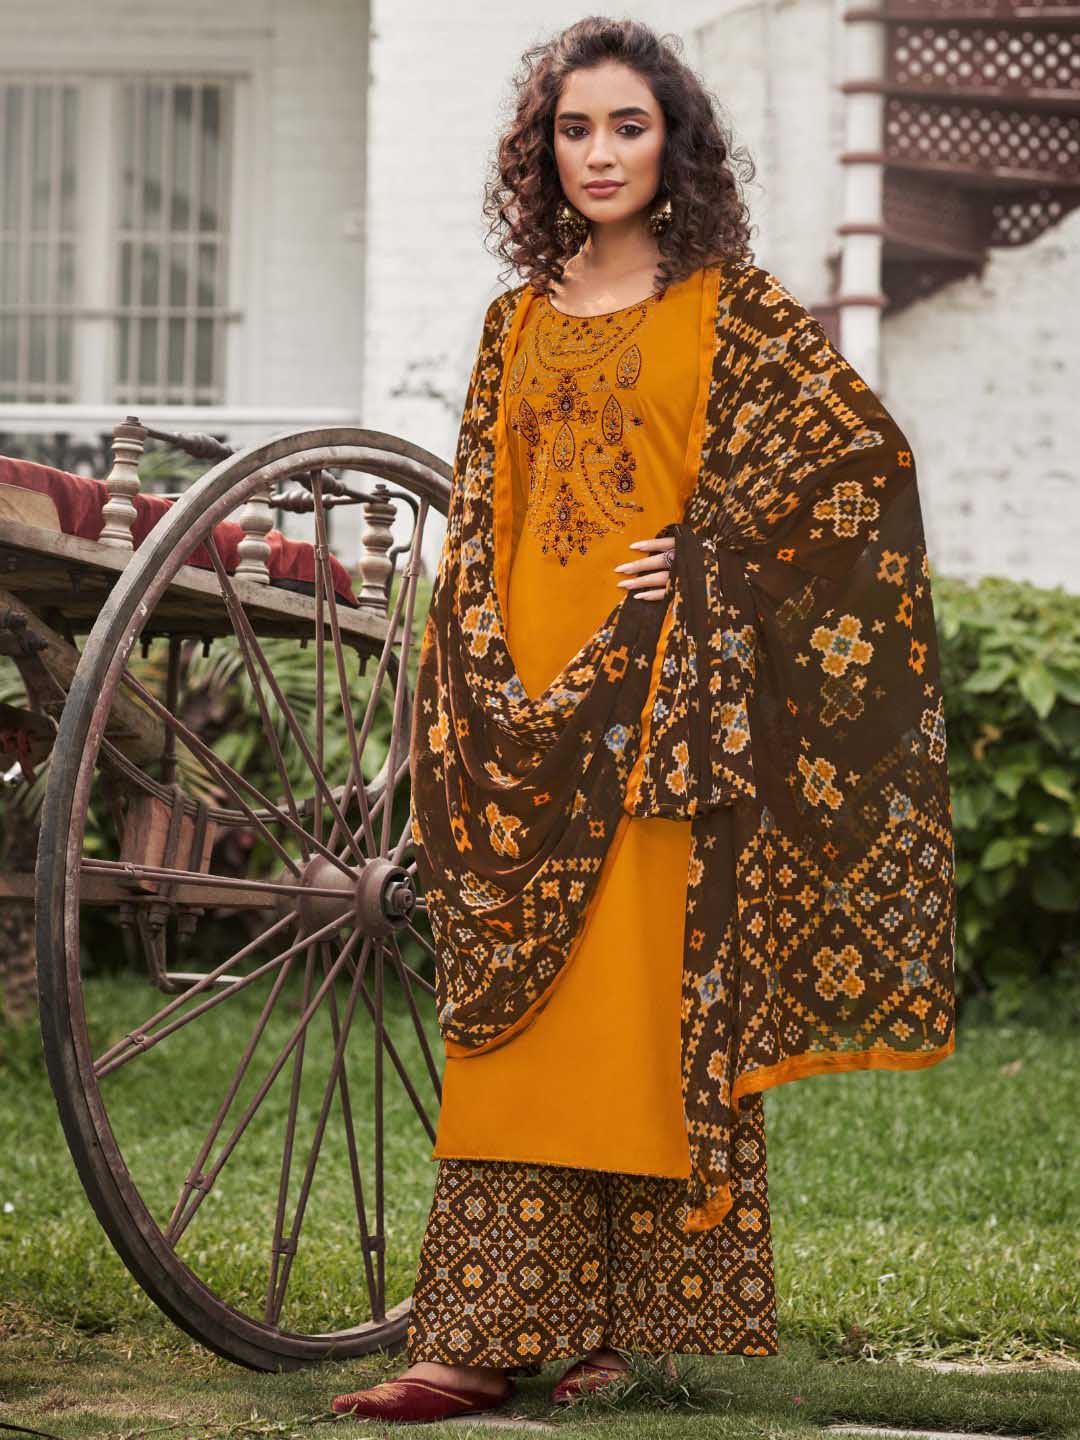 Unstitched Cotton Salwar Suit Yellow Dress Material with Embroidery Zulfat